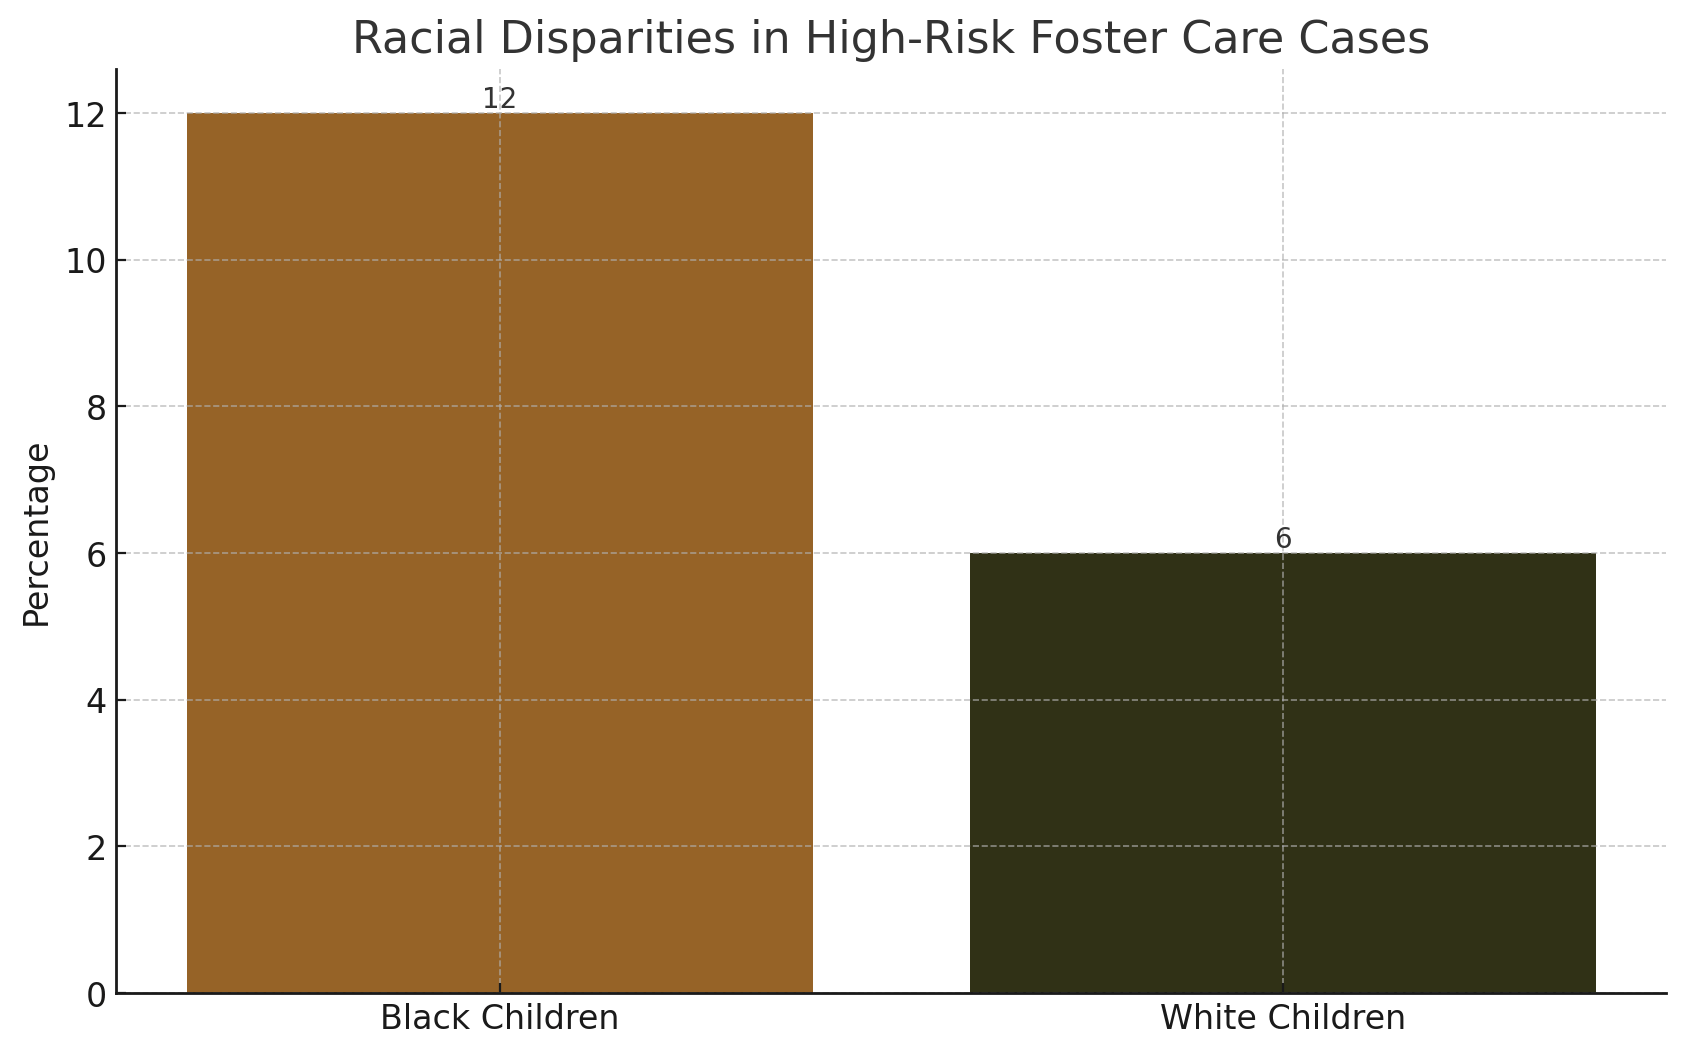 Bar chart showing 12% of Black children and 6% of white children in high-risk foster care cases.